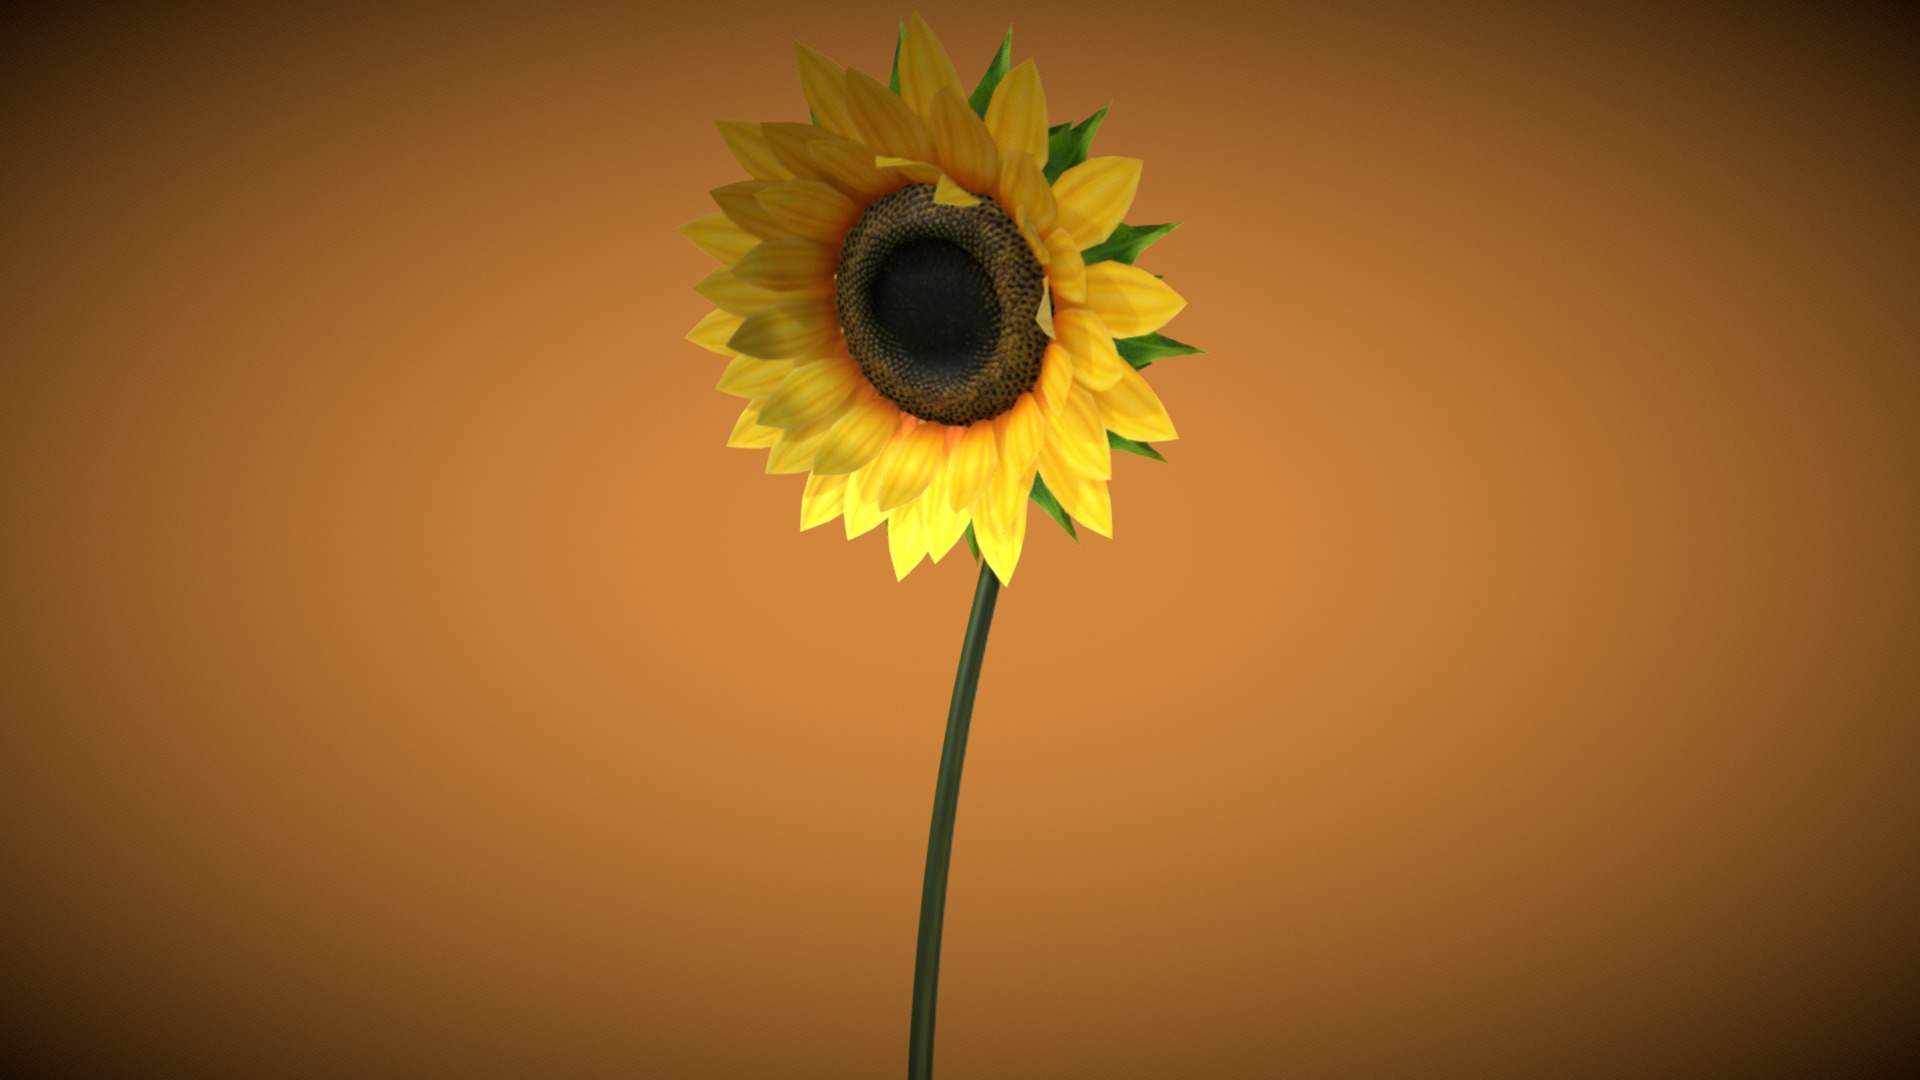 3D model Sunflower - This is a 3D model of the Sunflower. The 3D model is about a yellow sunflower with a green stem.